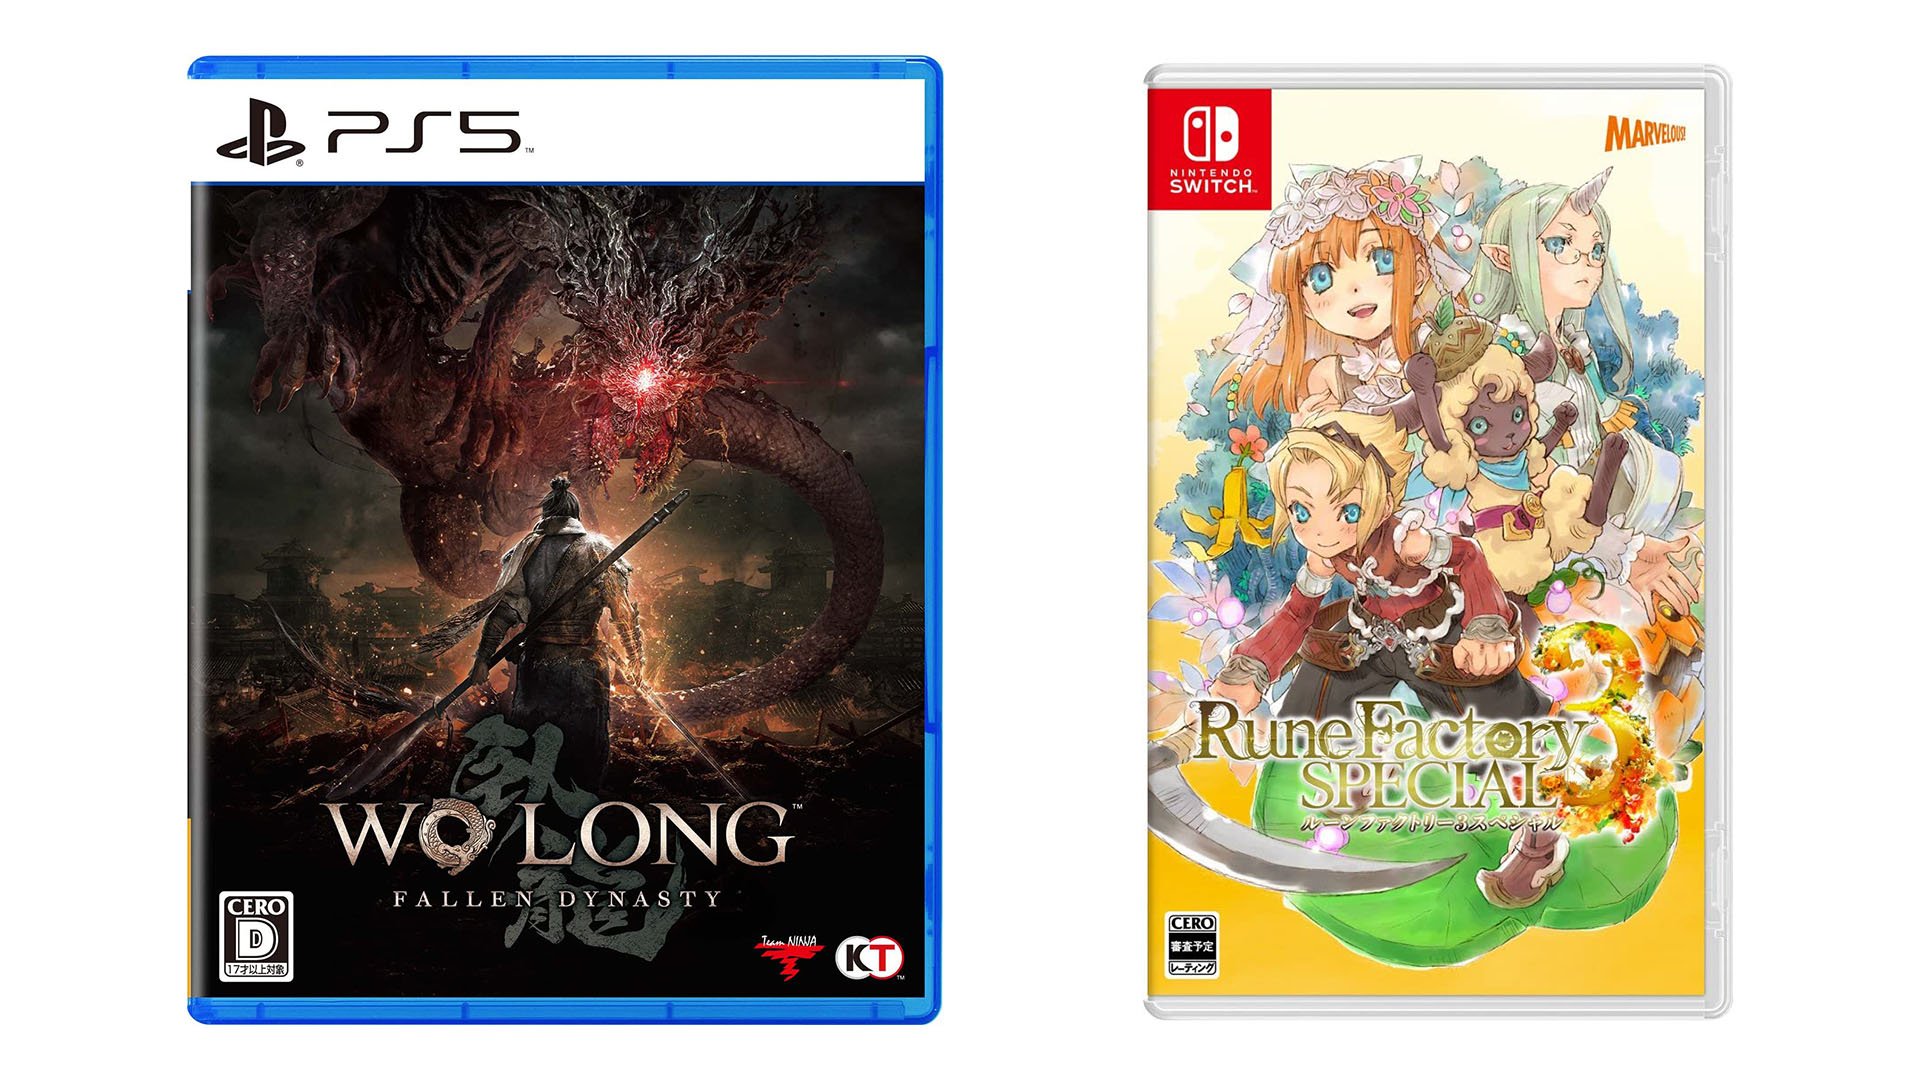 This Week’s Japanese Game Releases: Wo Long: Fallen Dynasty, Rune Factory 3 Special, more